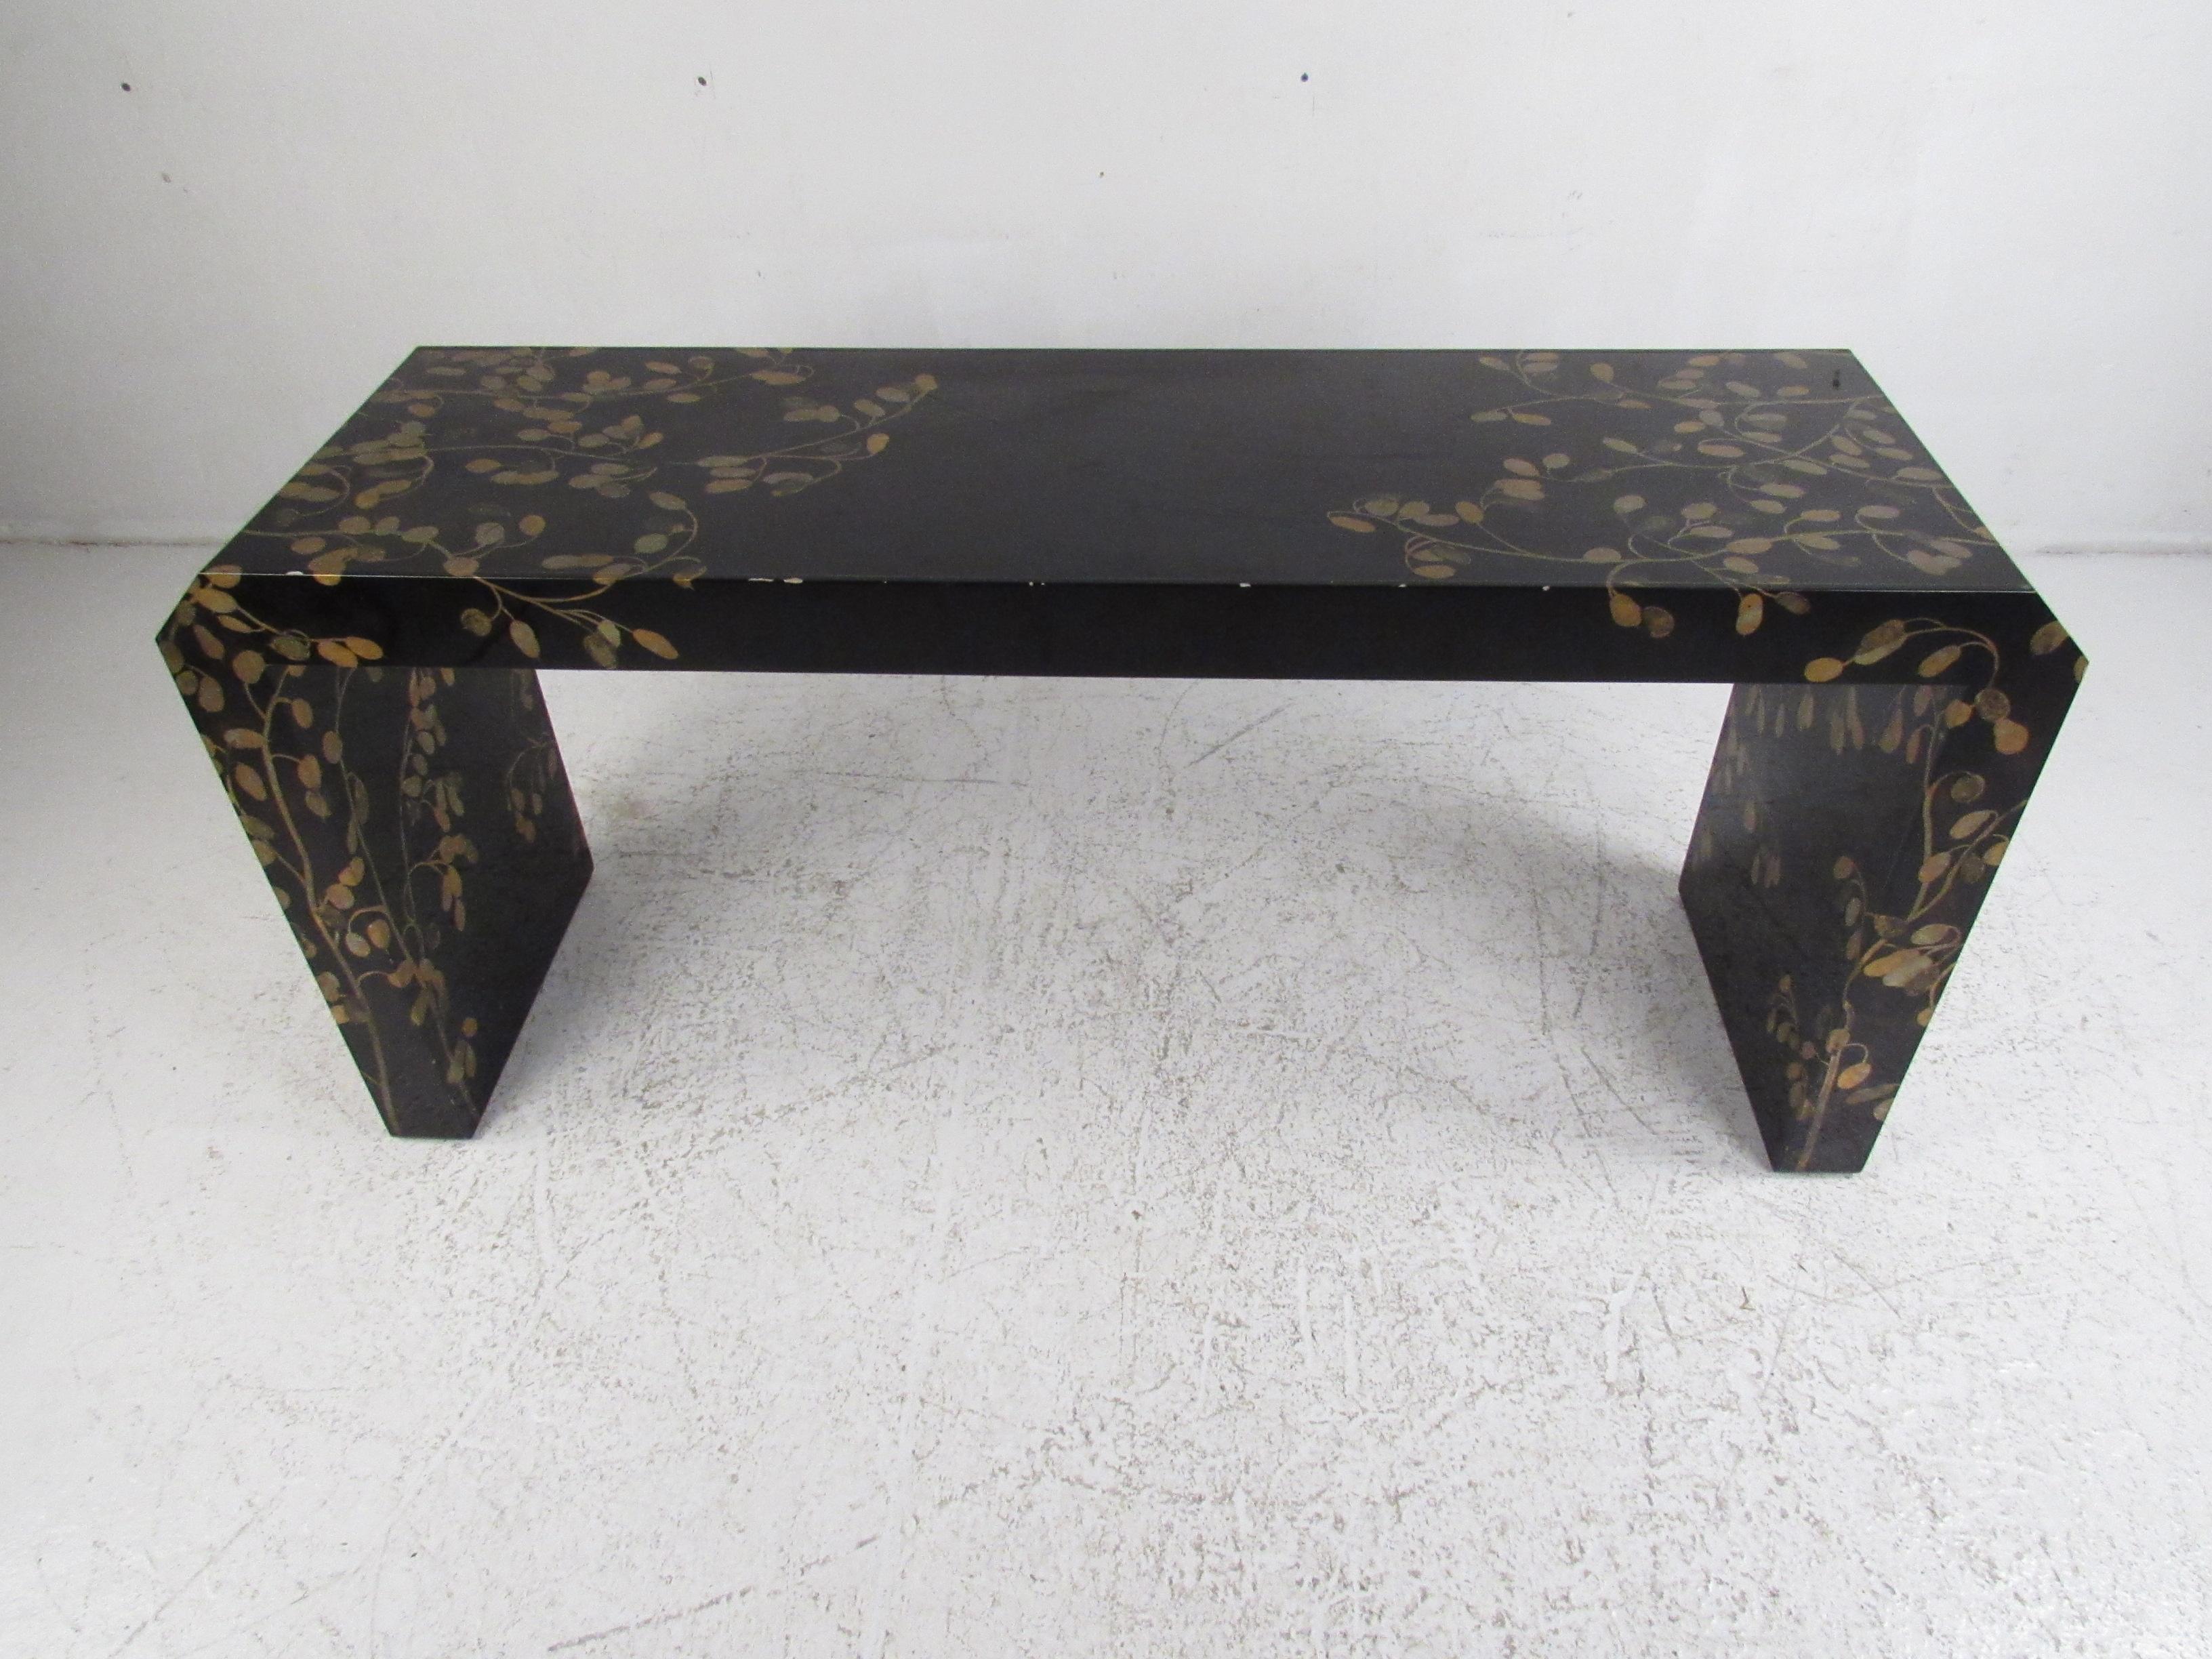 An impressive midcentury style console table with lovely floral artwork painted underneath a clear lacquer finish. This Asian style waterfall hall table looks great in the entryway, hallway, or even behind the sofa. Please confirm item location (NY